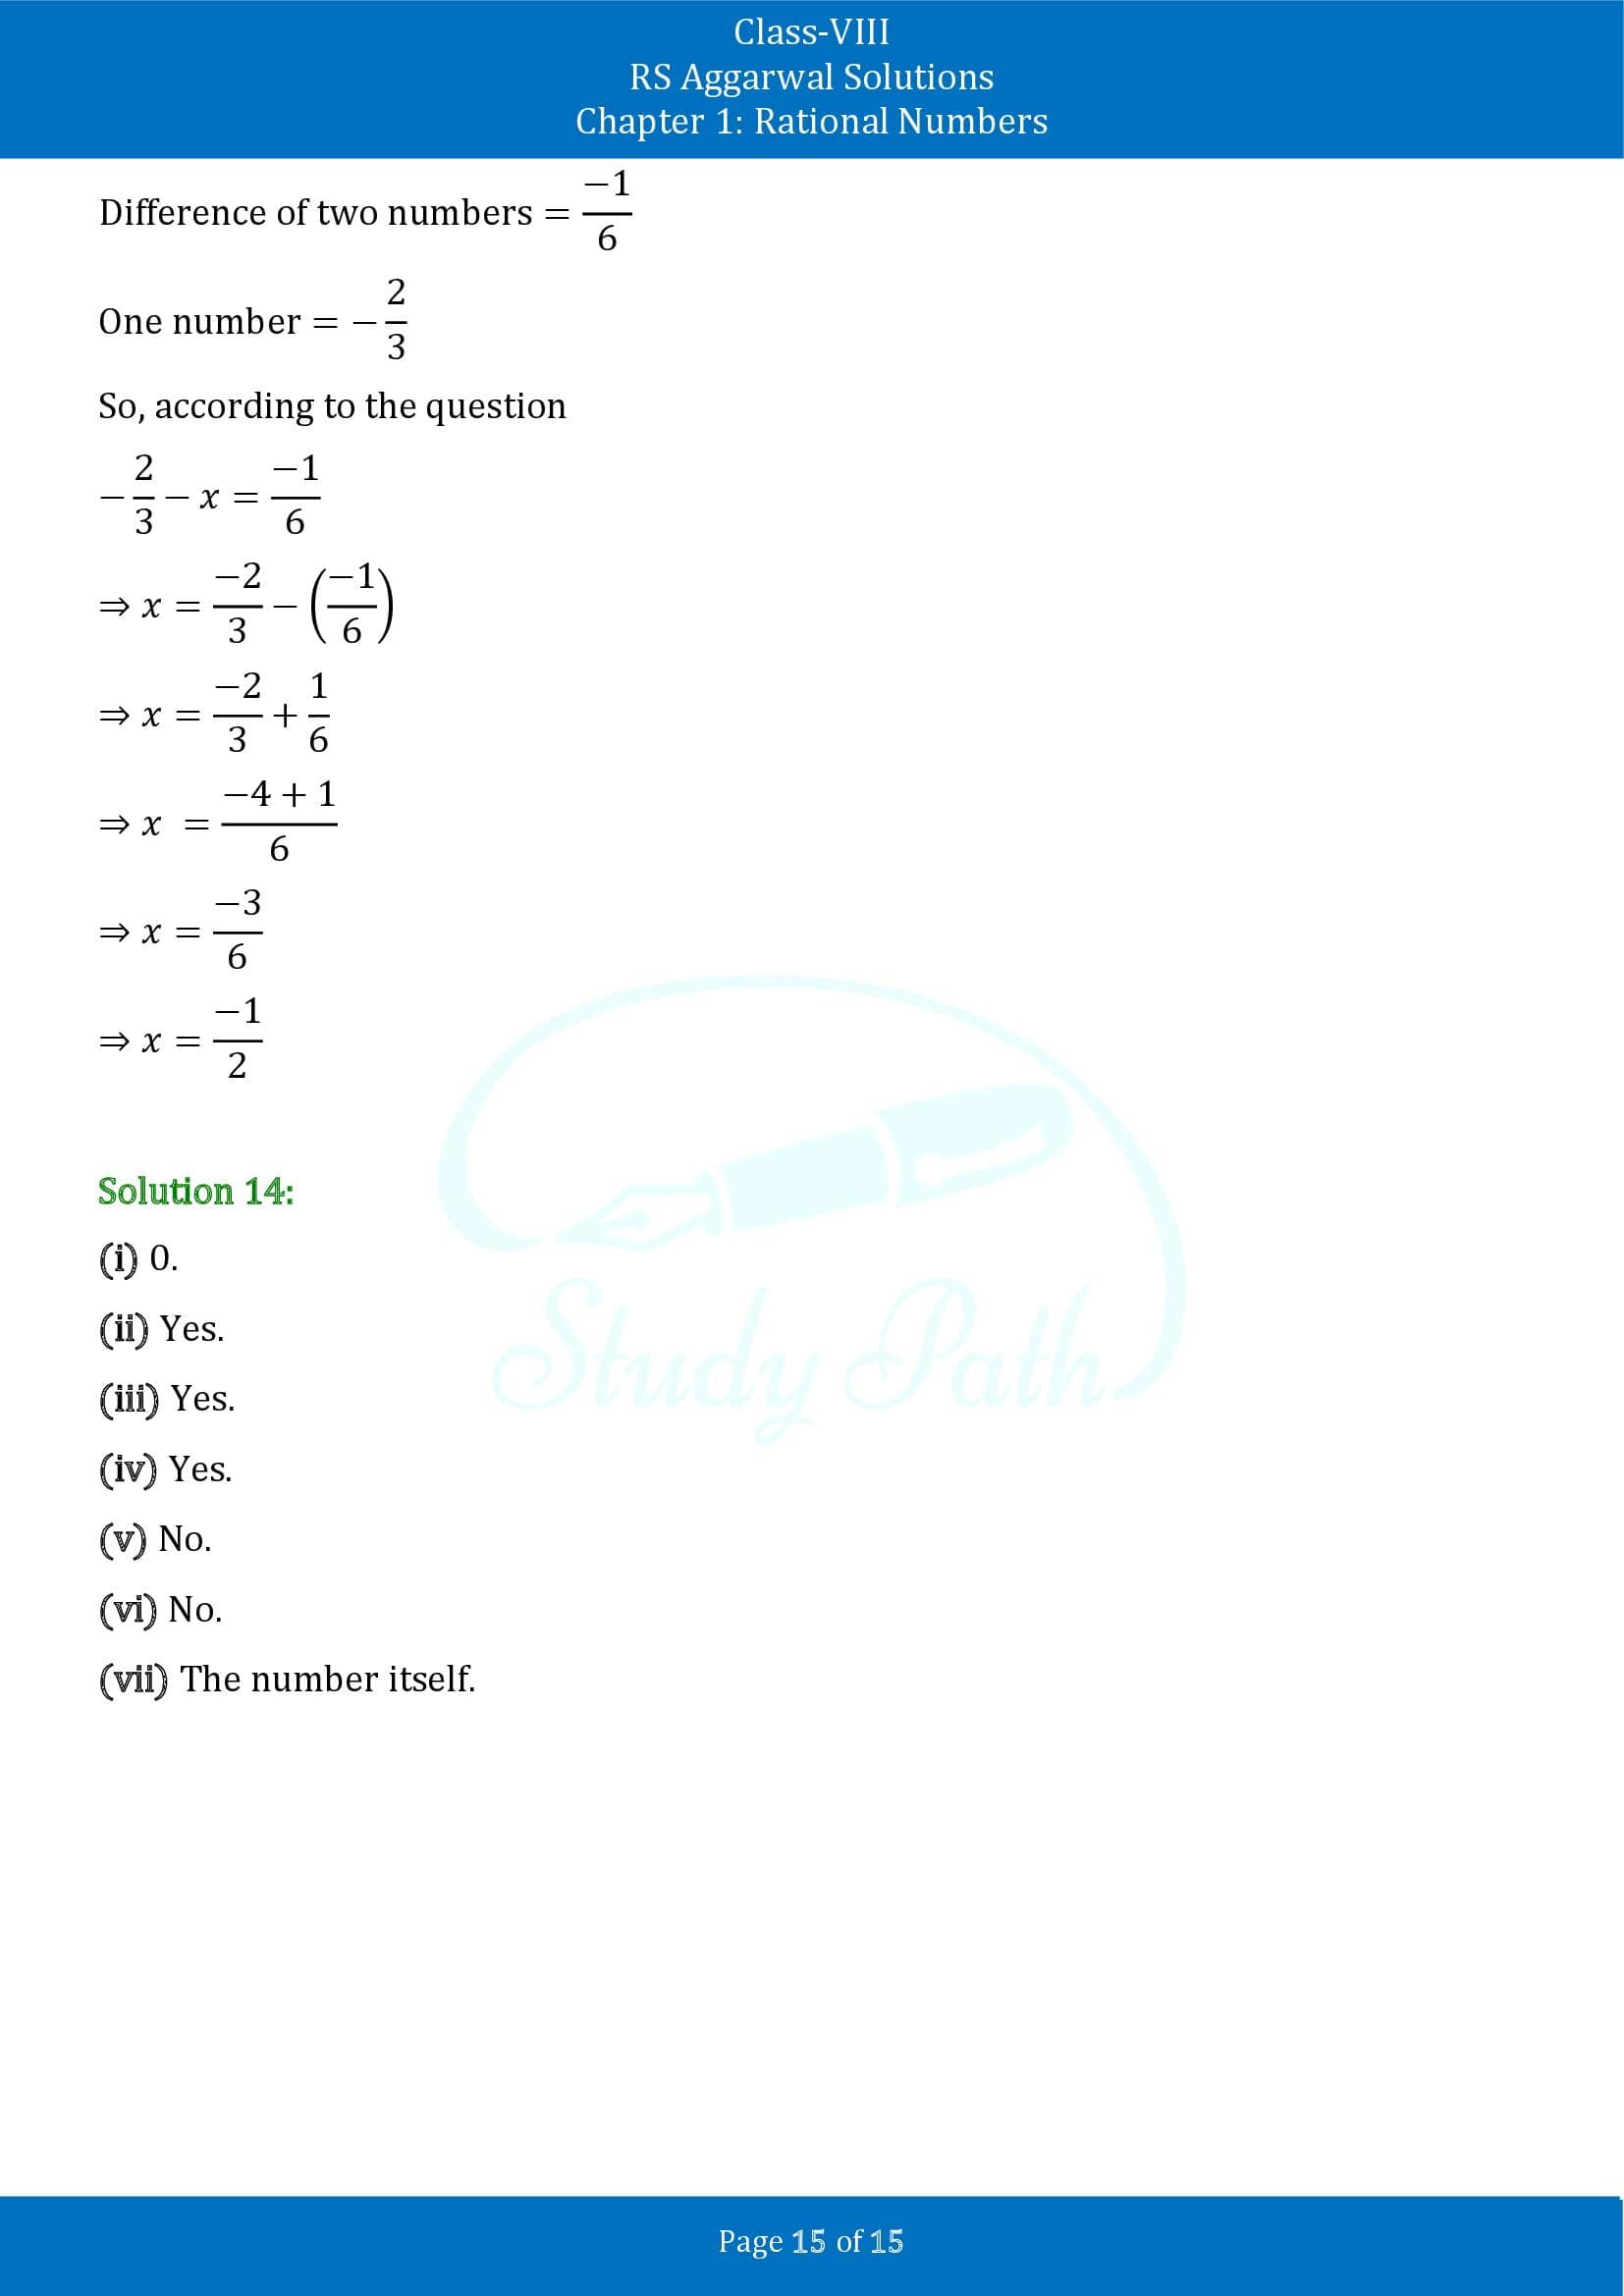 RS Aggarwal Solutions Class 8 Chapter 1 Rational Numbers Exercise 1C 00015